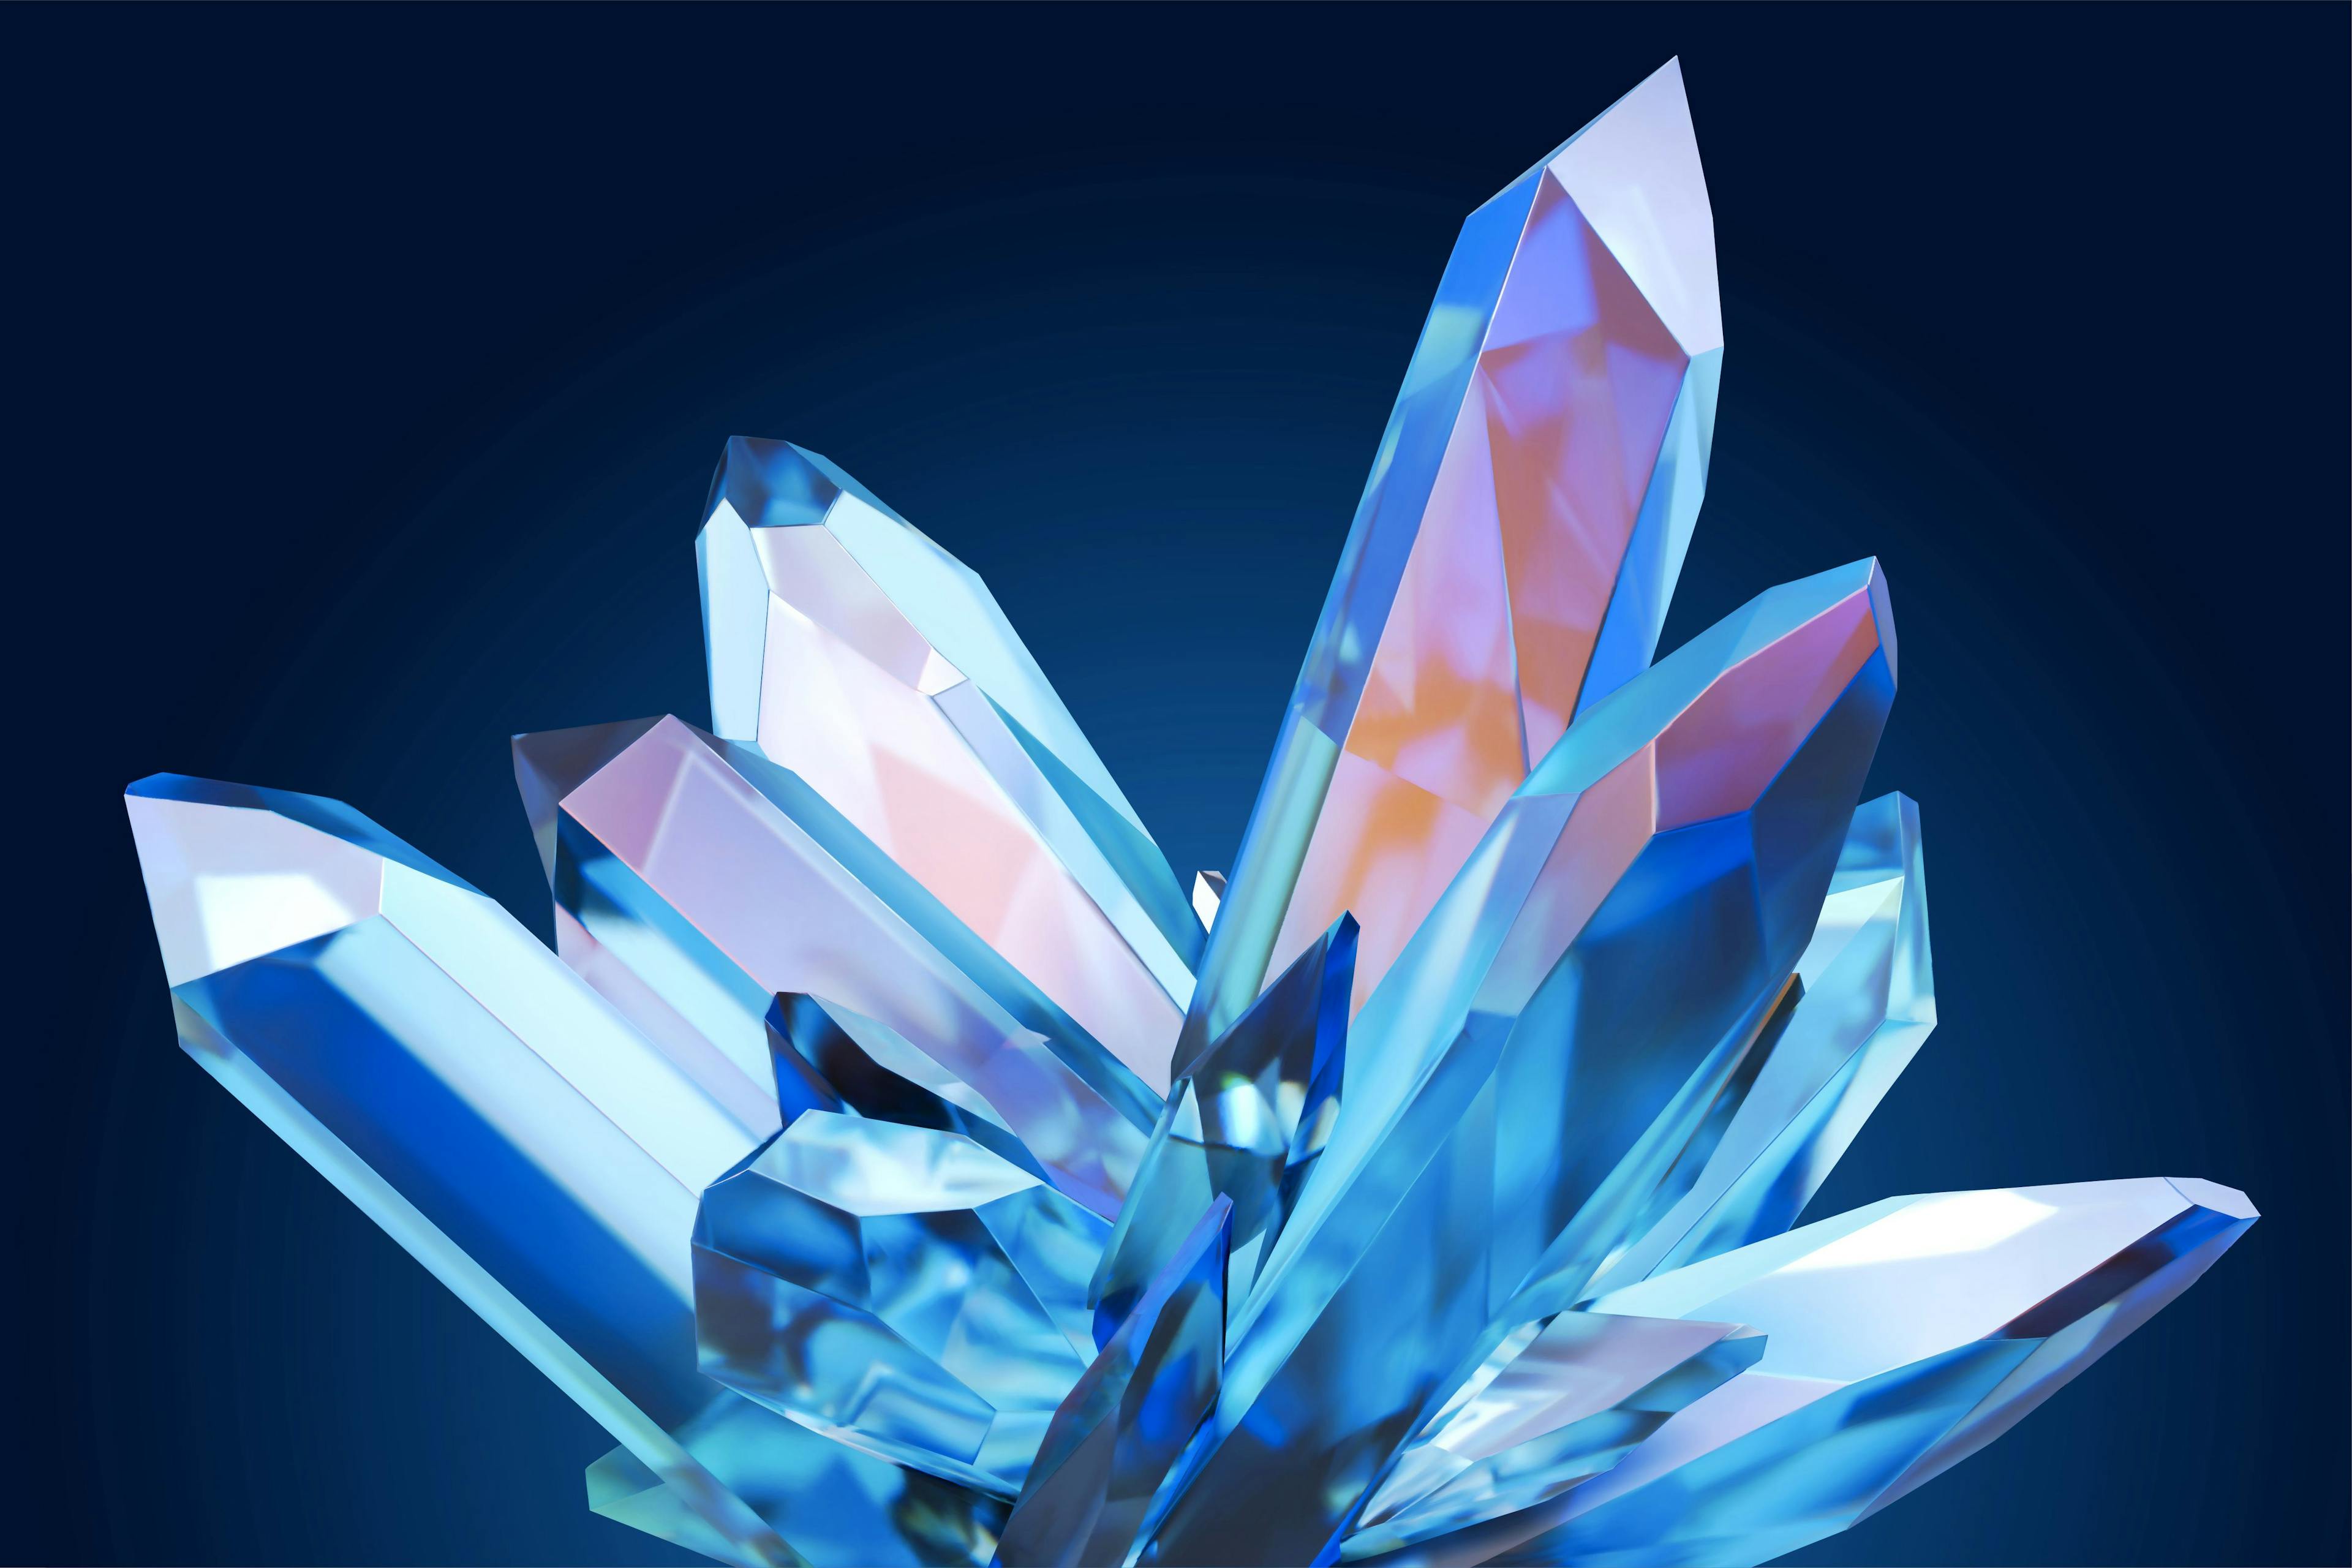 Beautiful blue clear crystal | Image Credit: © HstrongART - © HstrongART - stock.adobe.com.